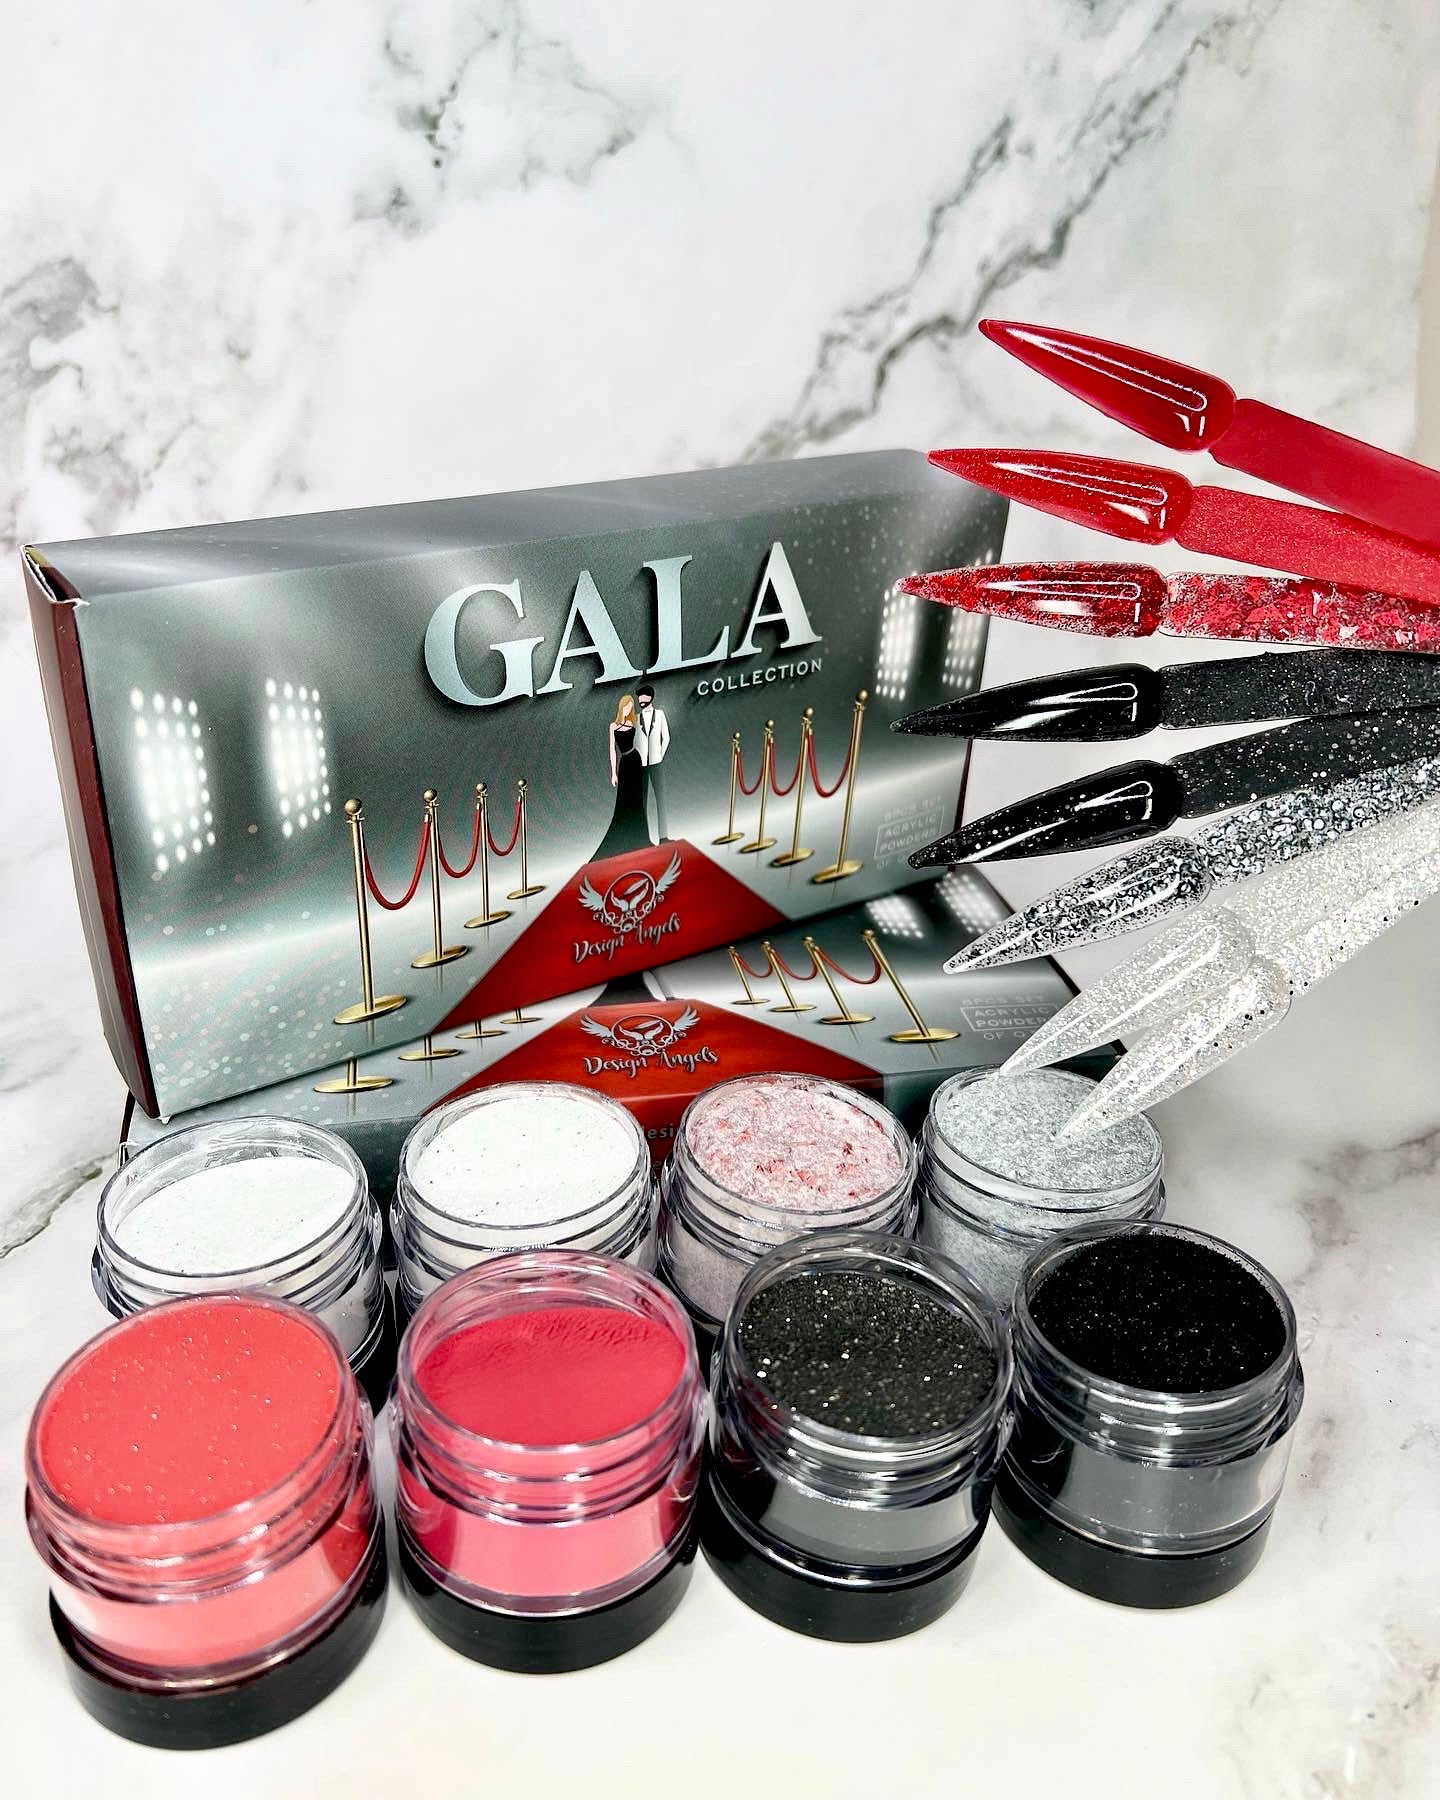 Gala Entire Collection